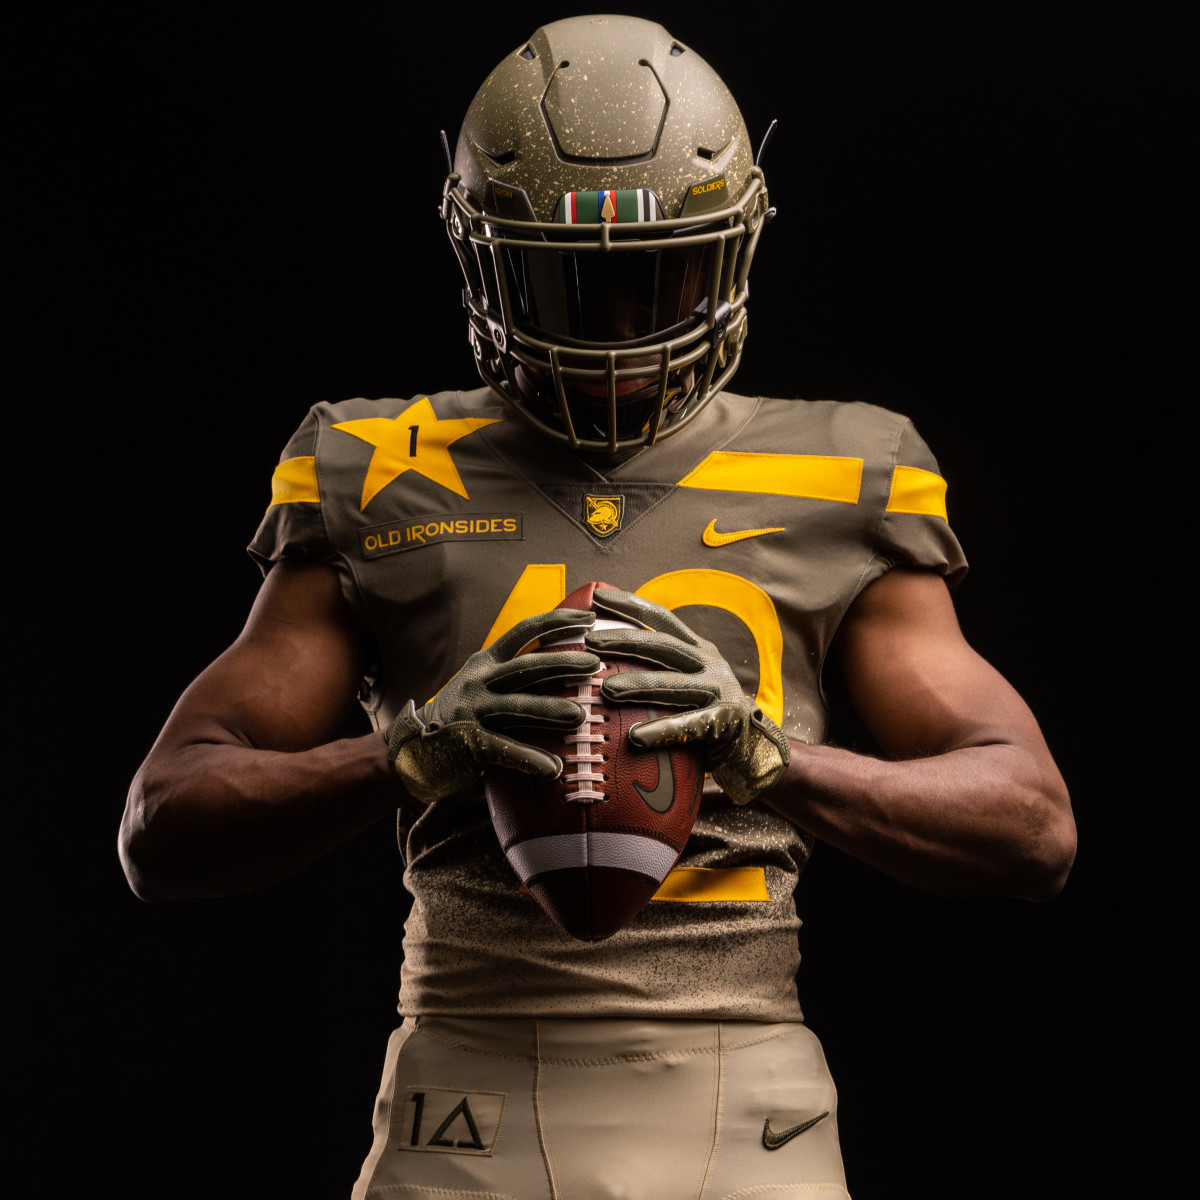 The 2021 Army-Navy game uniforms are epic